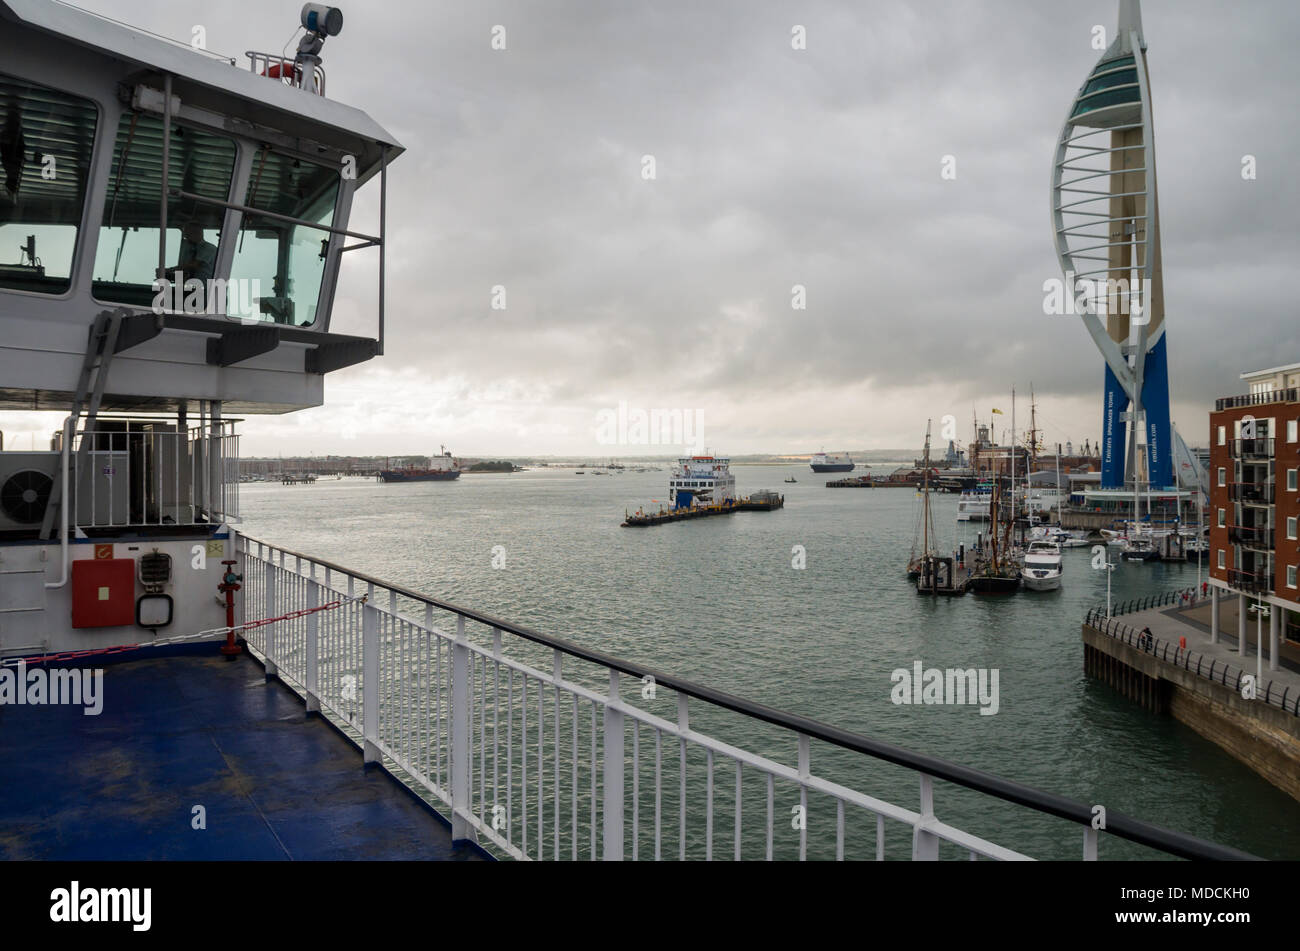 A view from wightlink ferry as it approaches Portmsouth terminal with boats and Spinnaker tower over Portsmouth harbour. Stock Photo